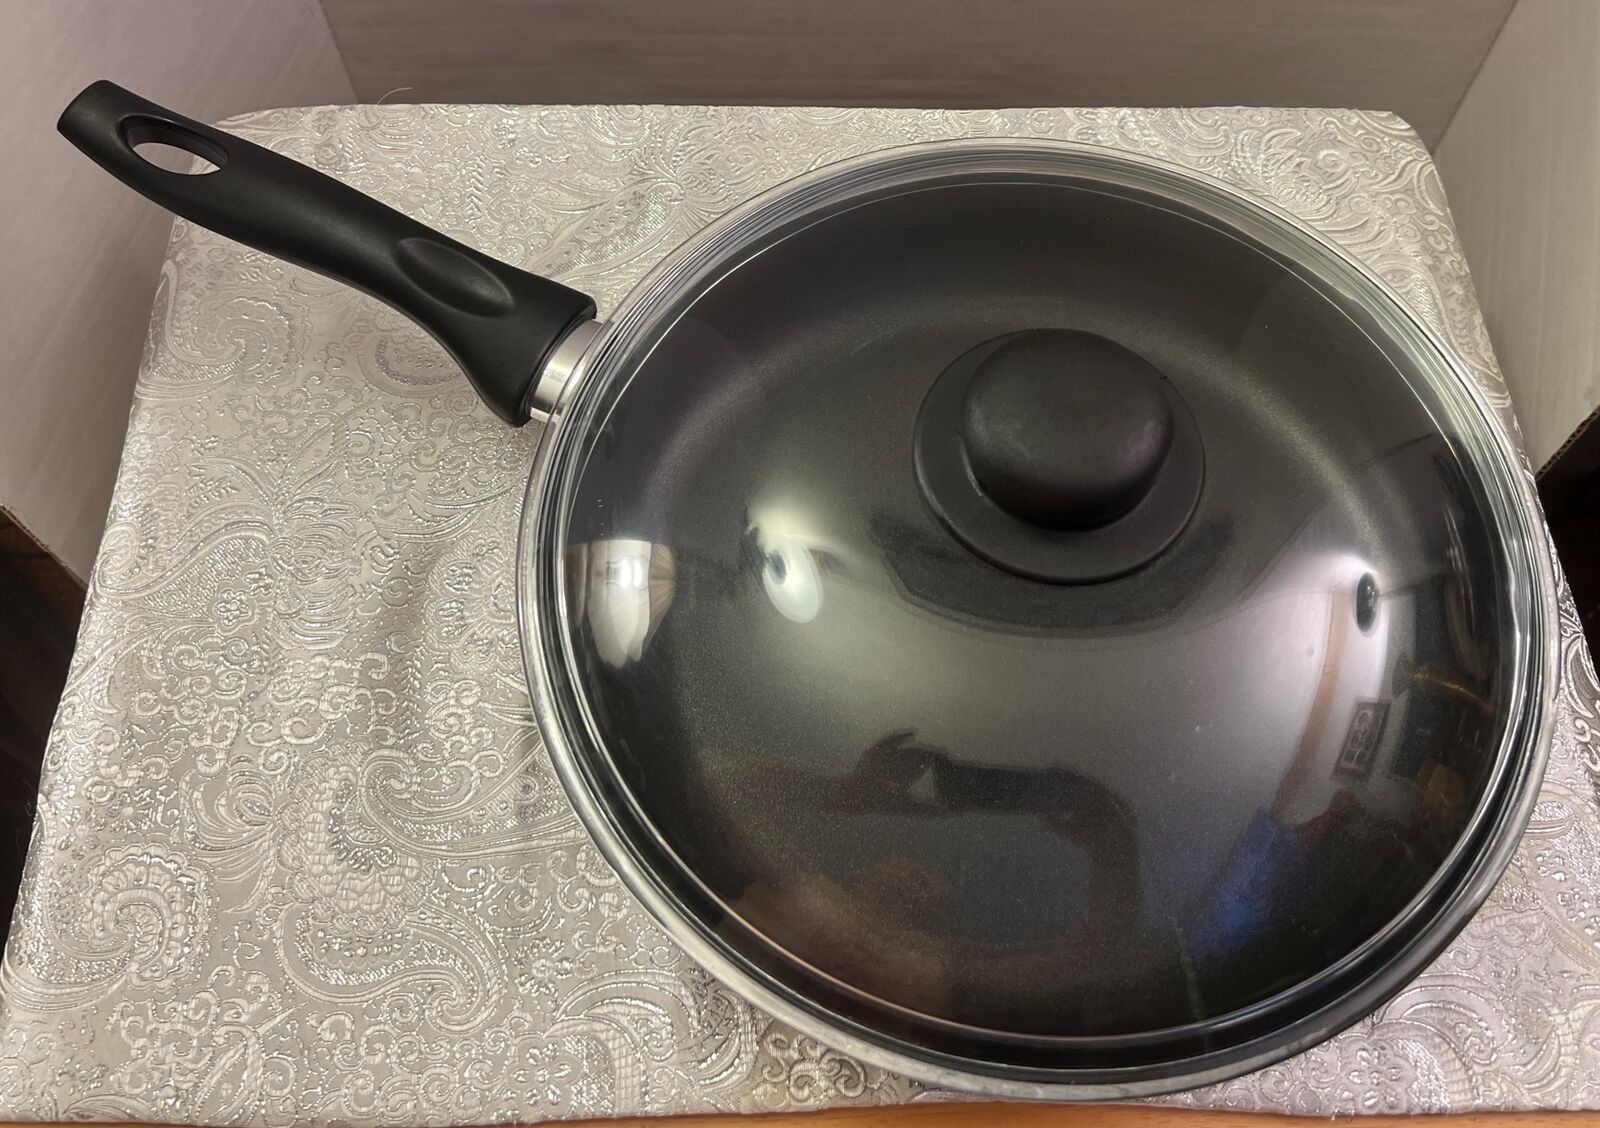 Crofton 11” Skillet With Glass Lid , Preowned, Excellent Condition